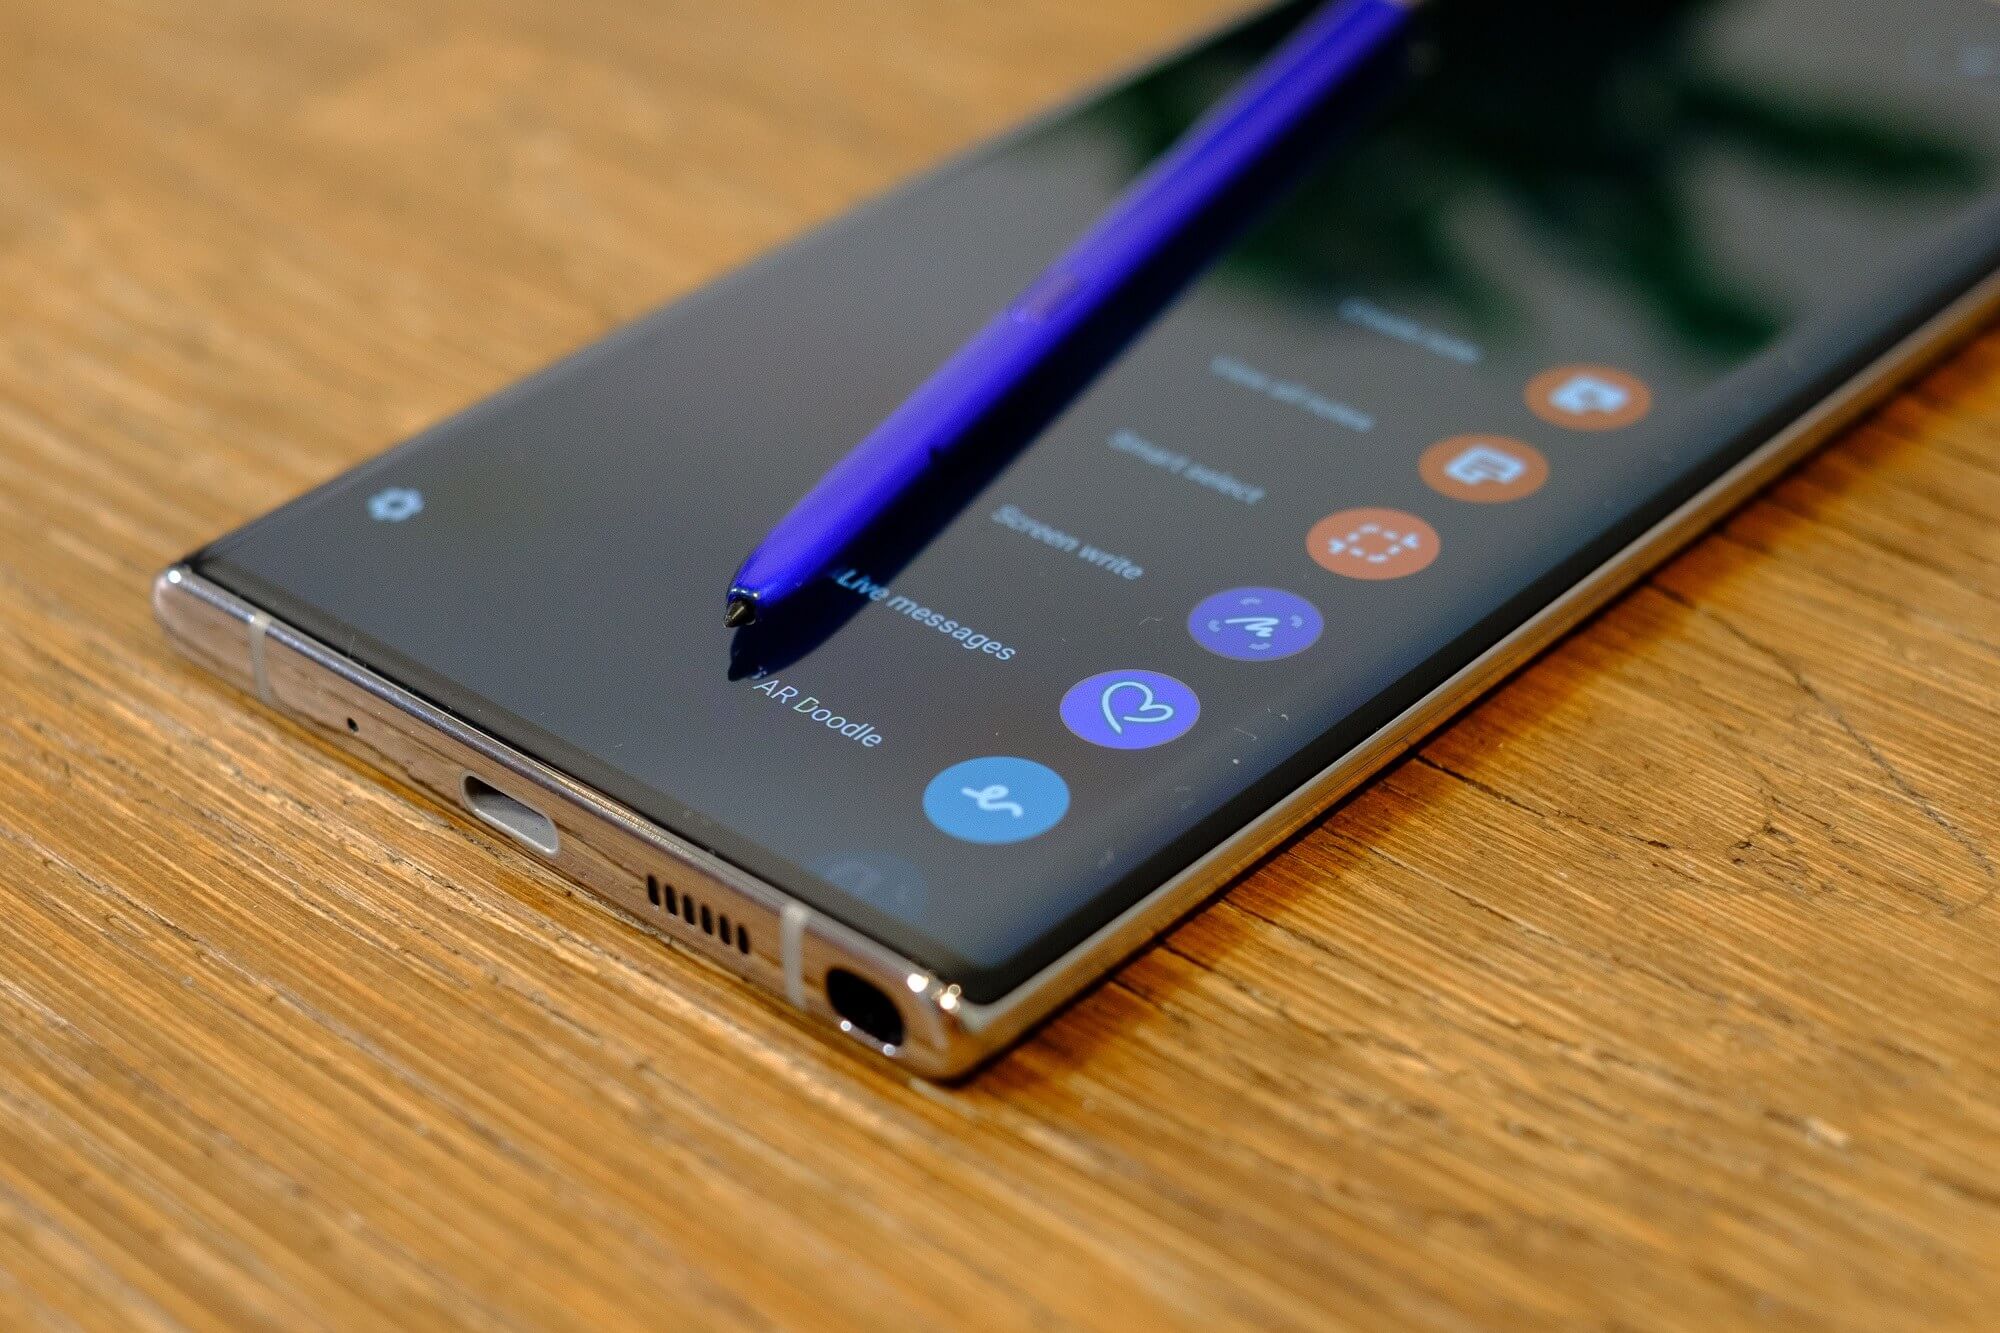 Samsung confirms S-Pen support coming to other devices, but Galaxy Note will continue